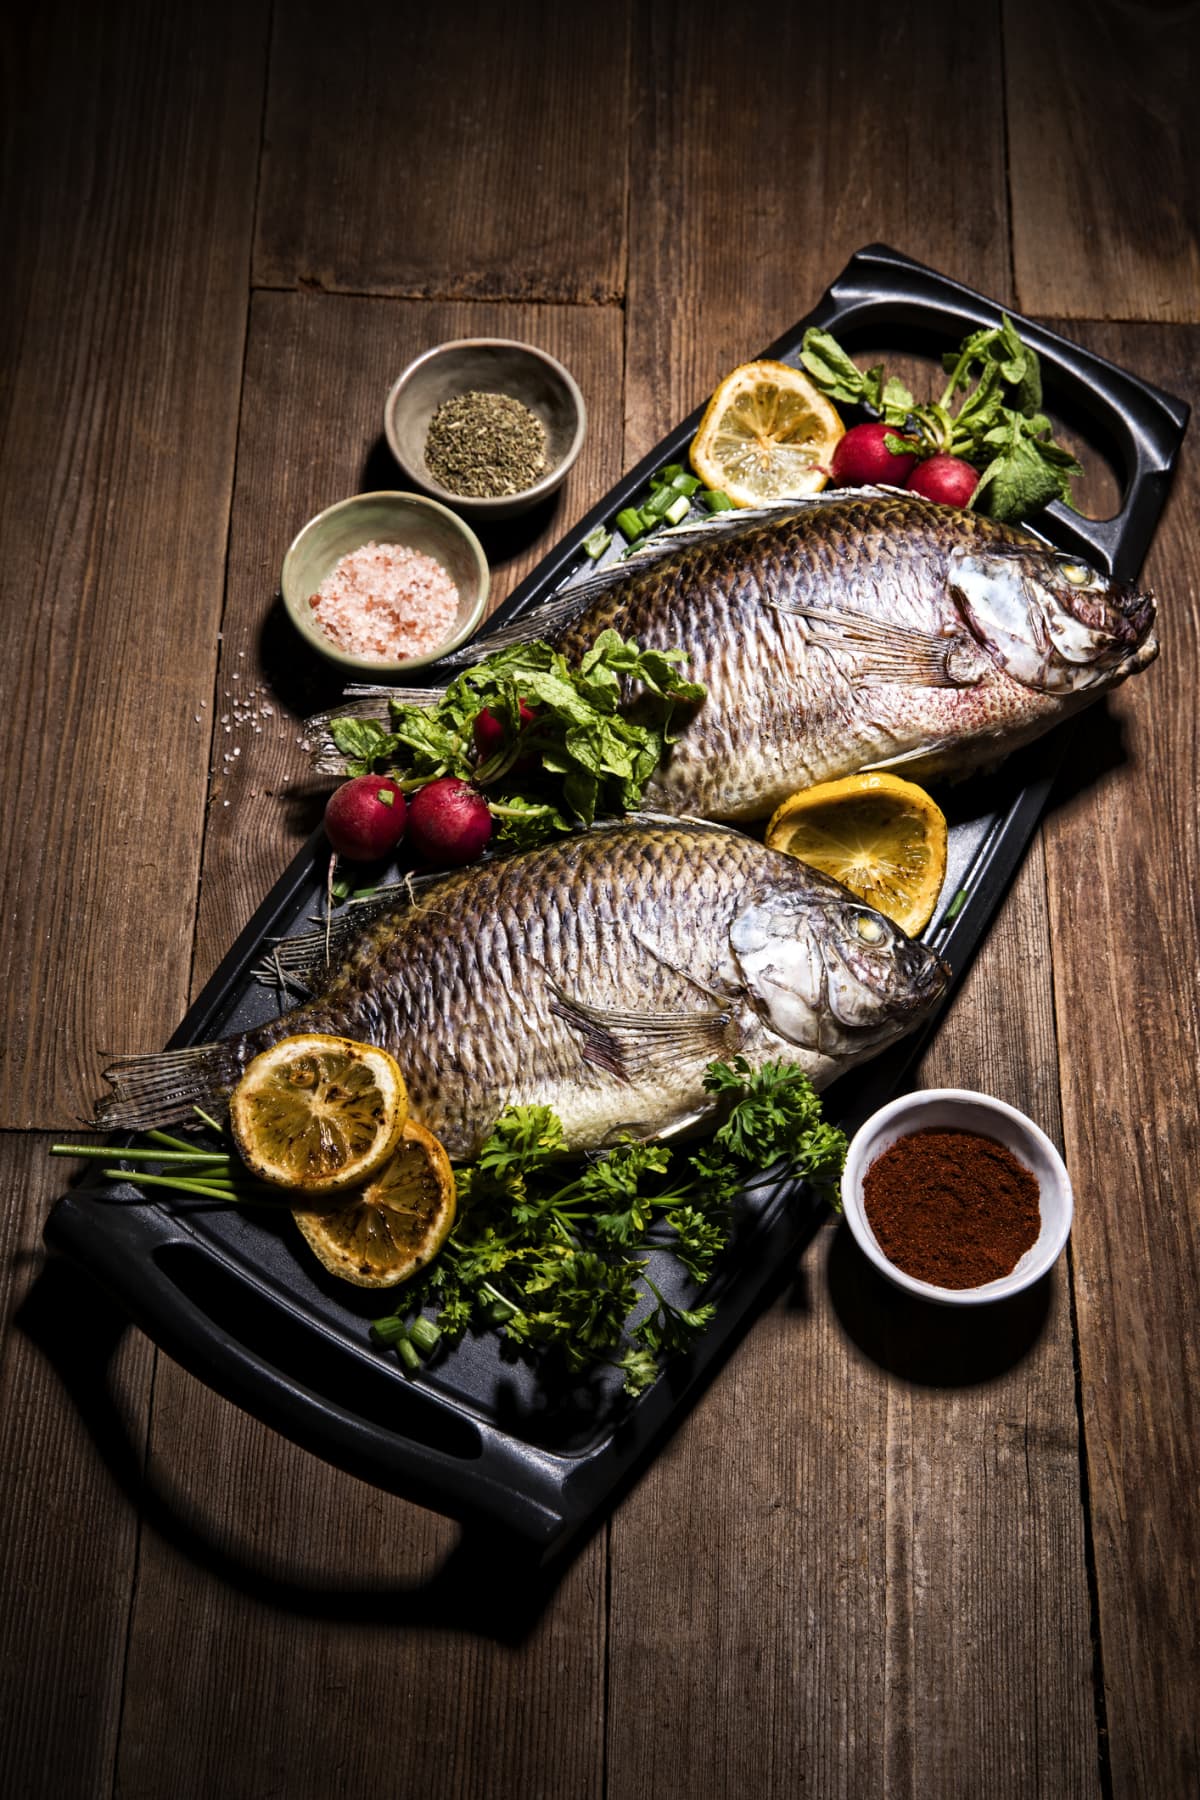 Baked sea Bass fish with arugula, grilled seabass. Black background. Top view.